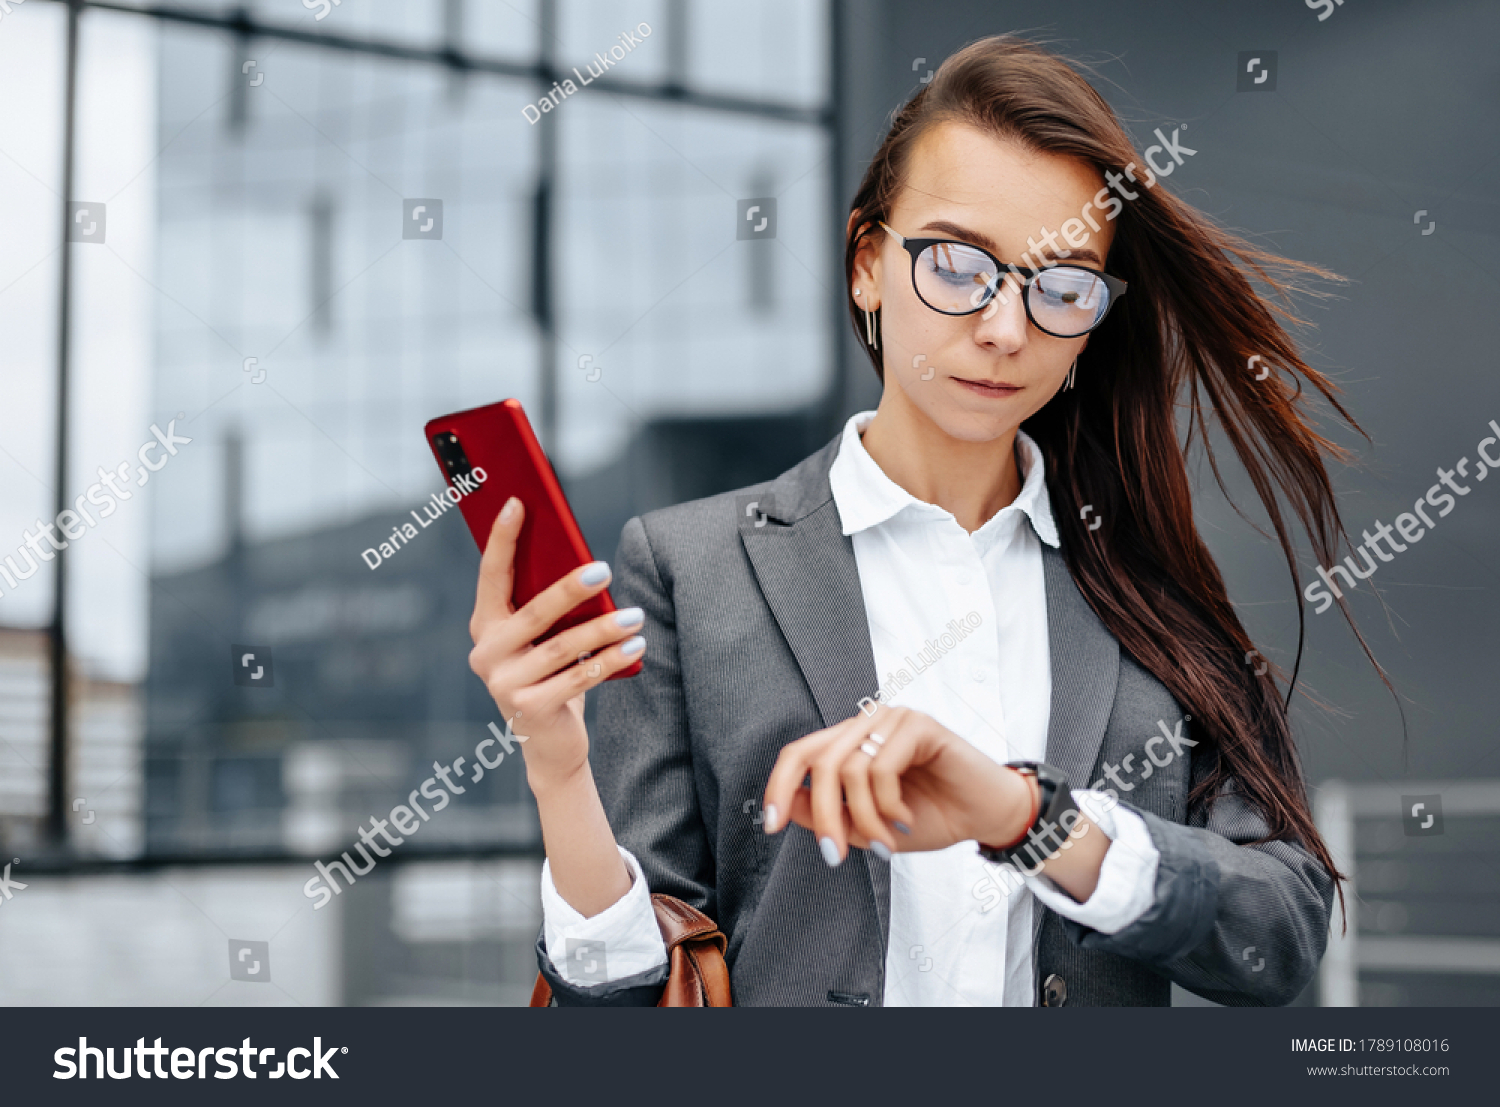 A business woman checks the time in the city during a working day waiting for a meeting. Discipline and timing. An employee goes towards a corporate meeting. #1789108016